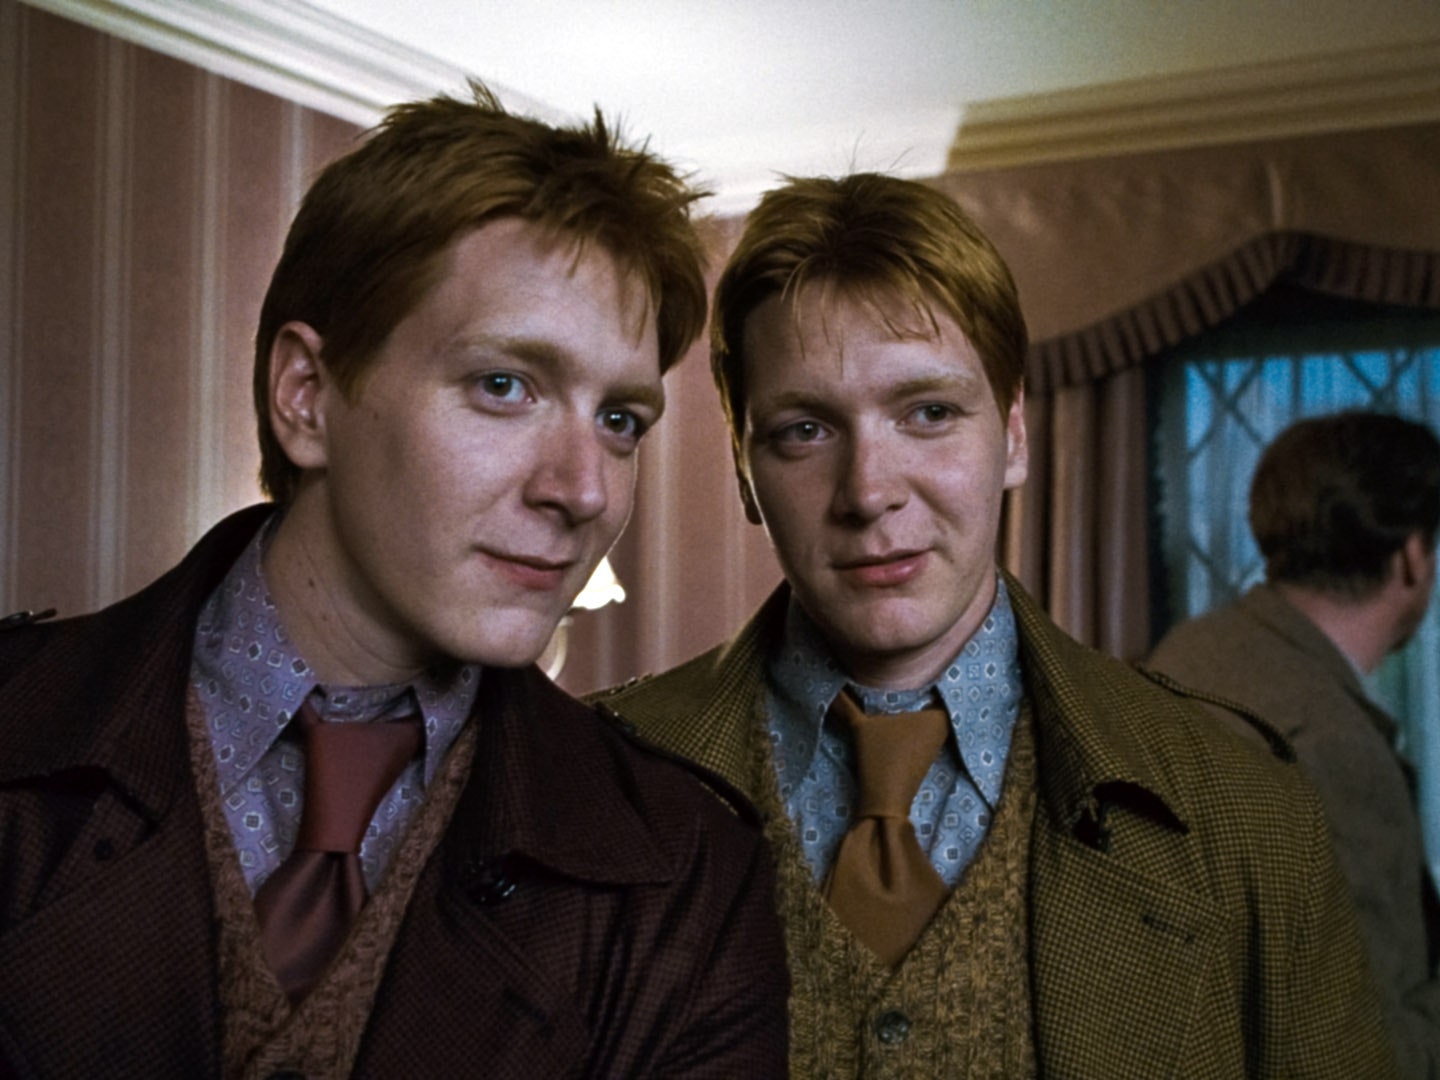 Who played Fred and George Weasley in the Harry Potter franchise? 2